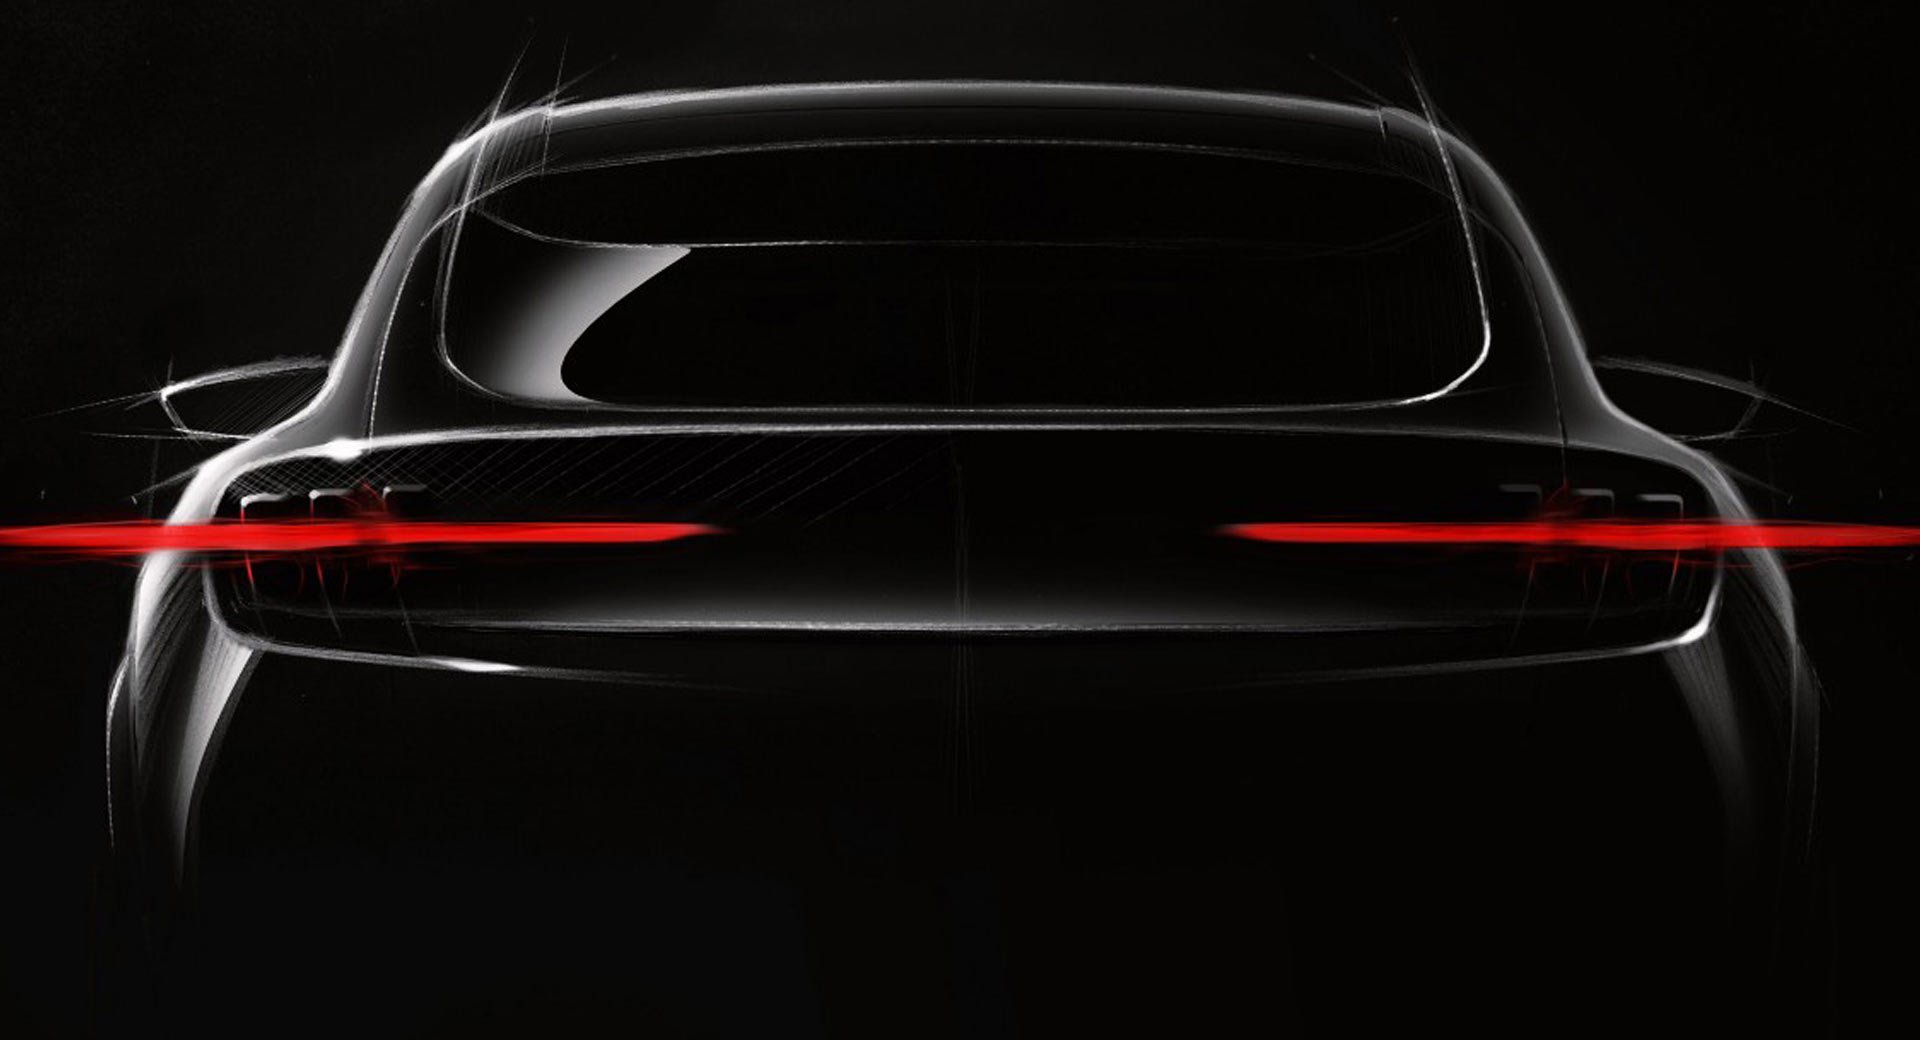 Ford’s Mustang-Inspired Electric Crossover Will Debut Later This Year